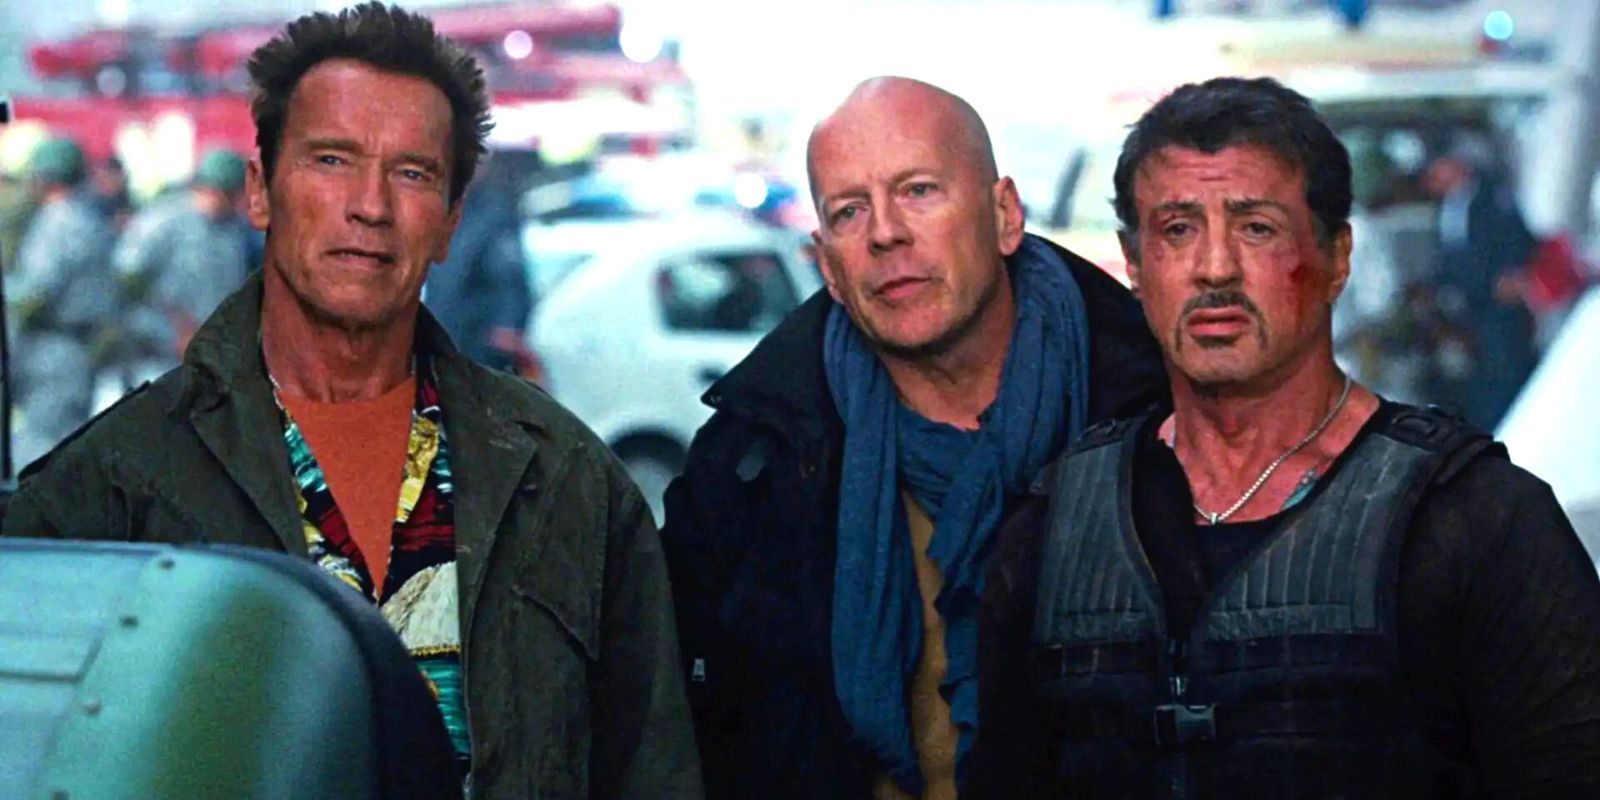 Arnold Schwarzenegger, Bruce Willis and Sylvester Stallone looking confused